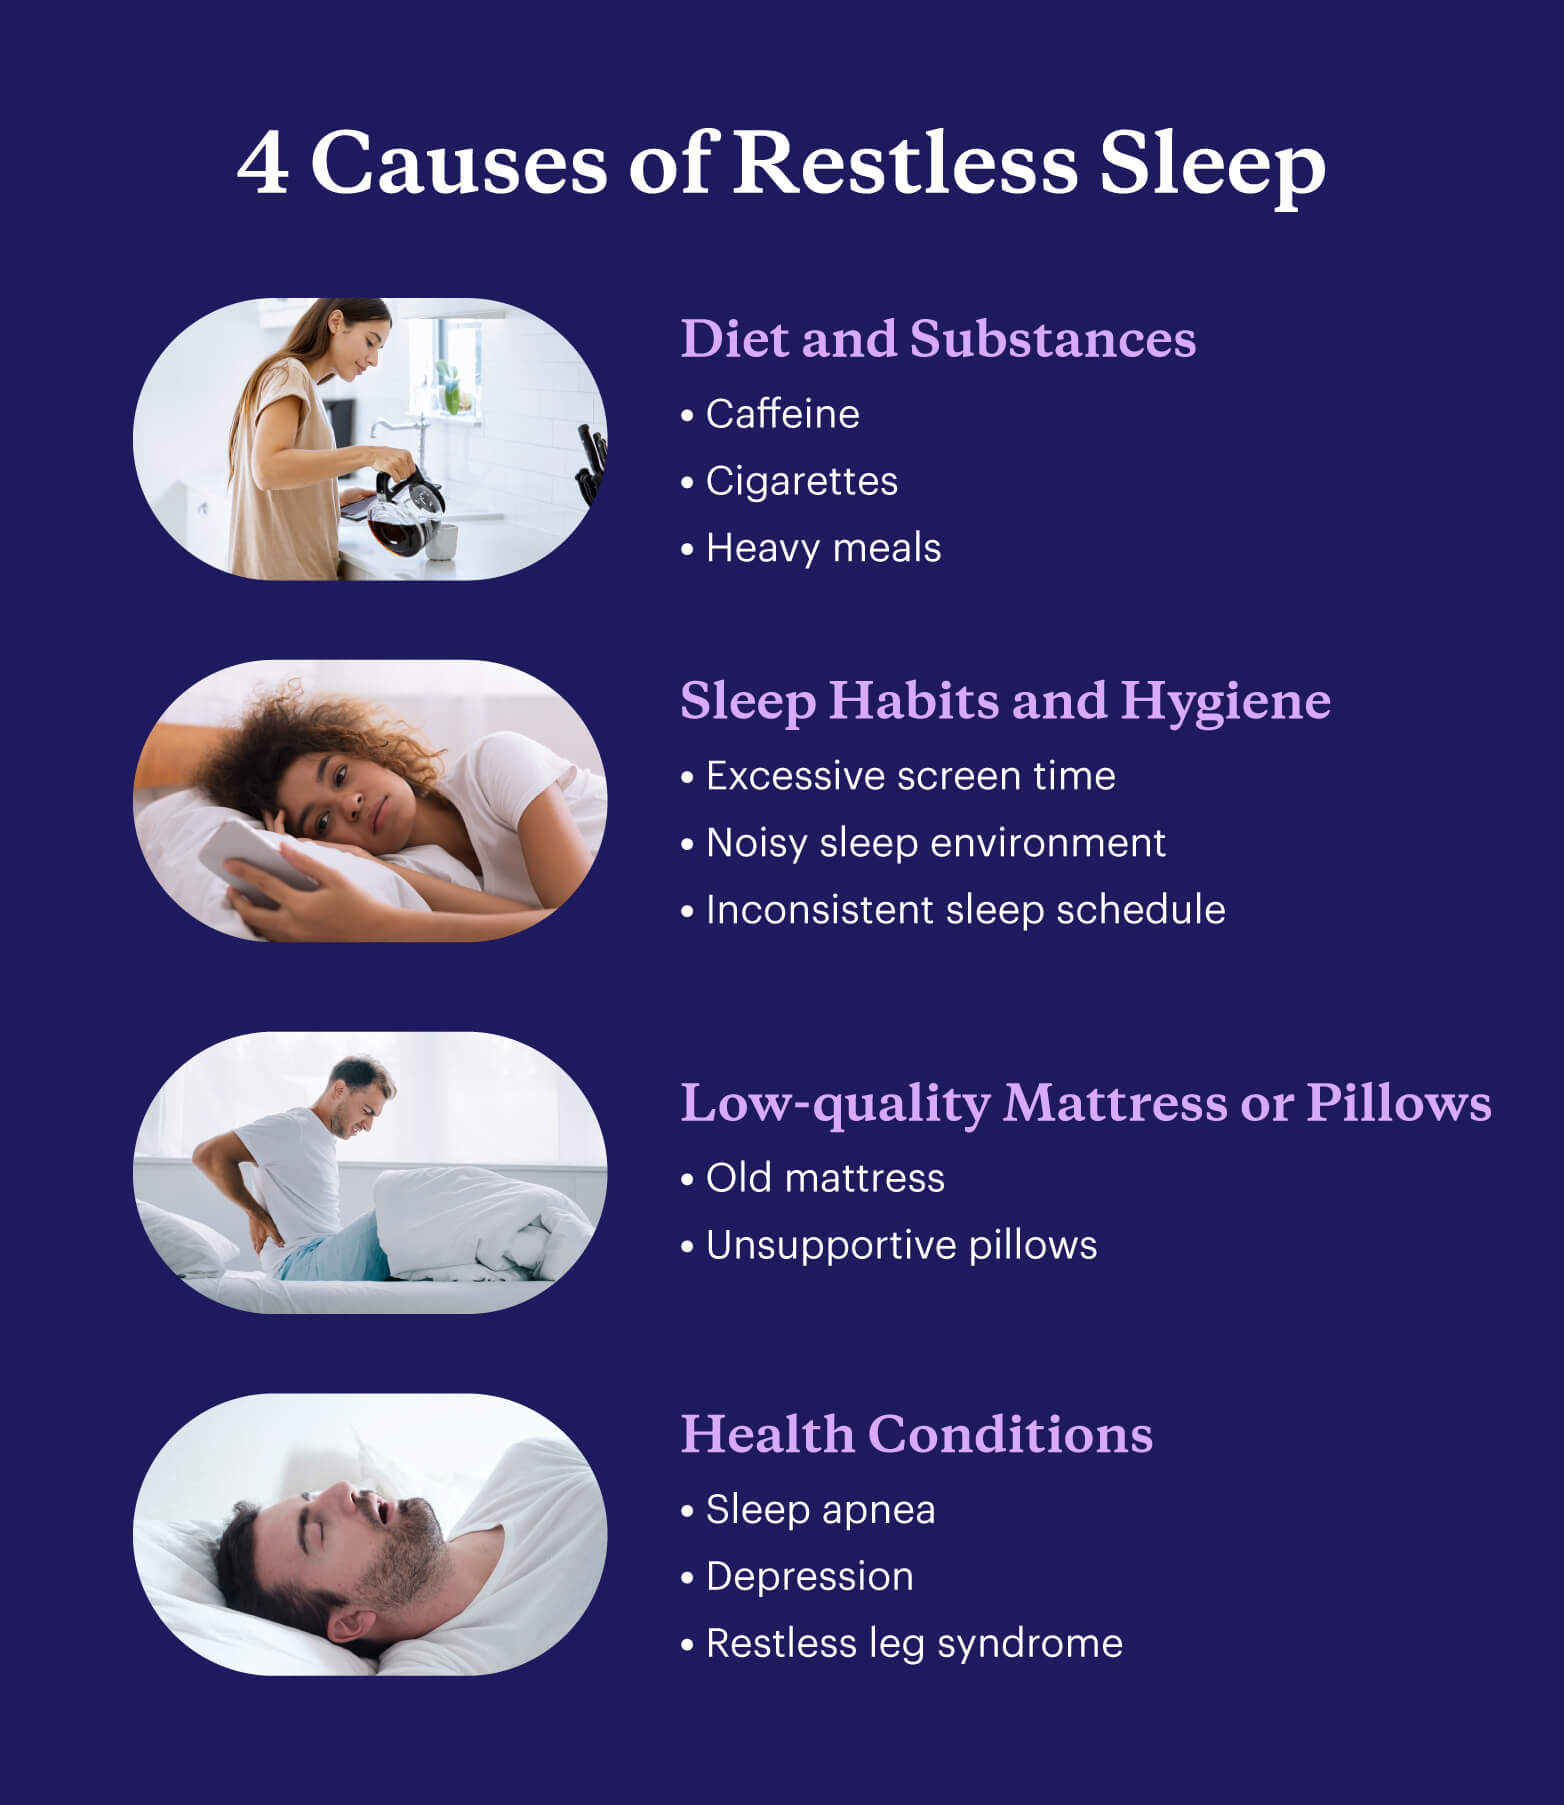 A graphic lists 4 causes of restless sleep.